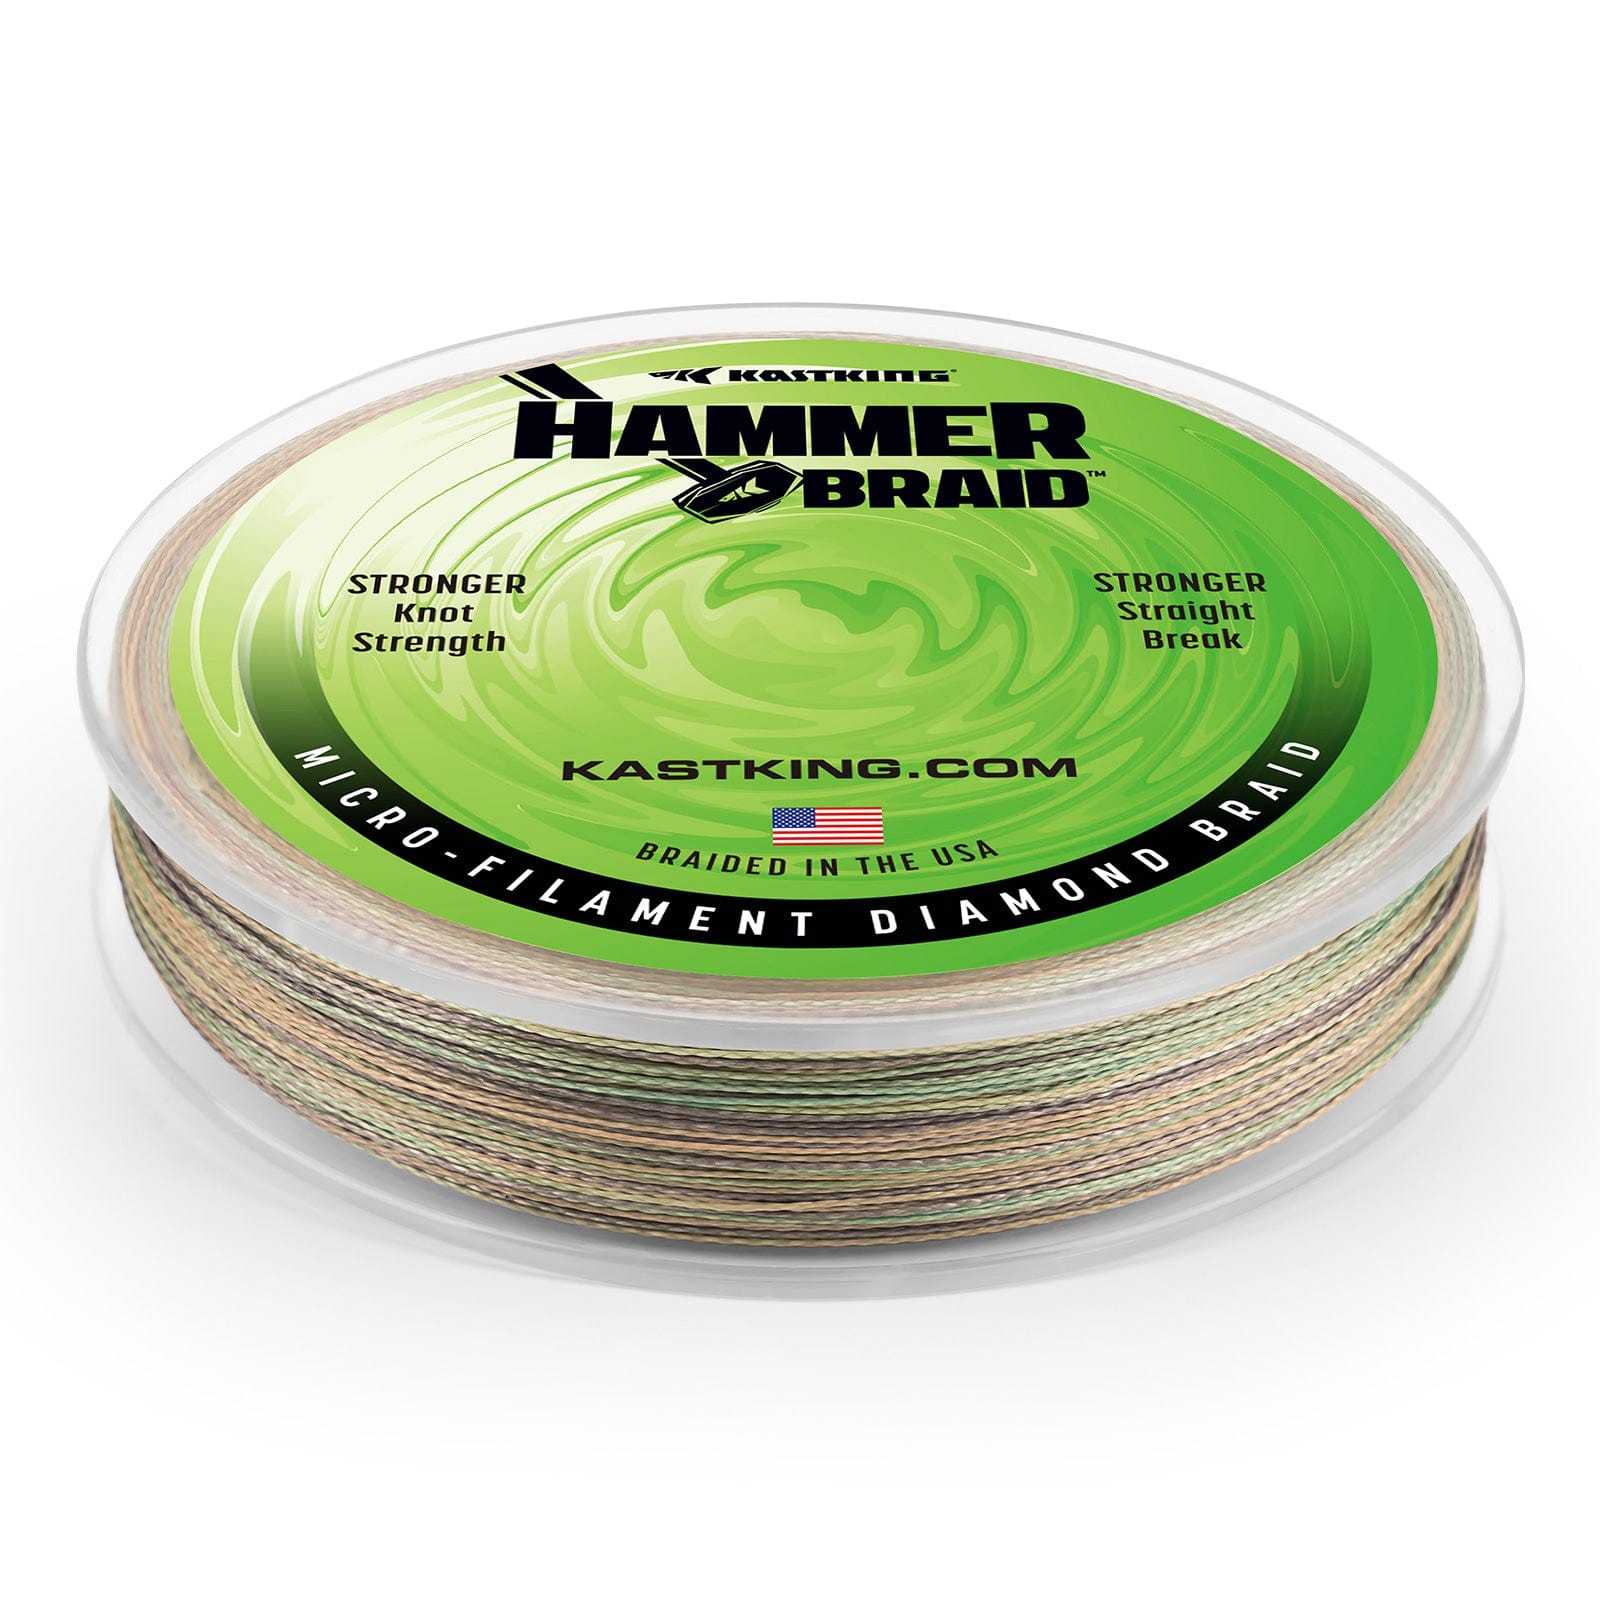 Kast King Hammer Braided Fishing Line  Up to 32% Off Free Shipping over  $49!